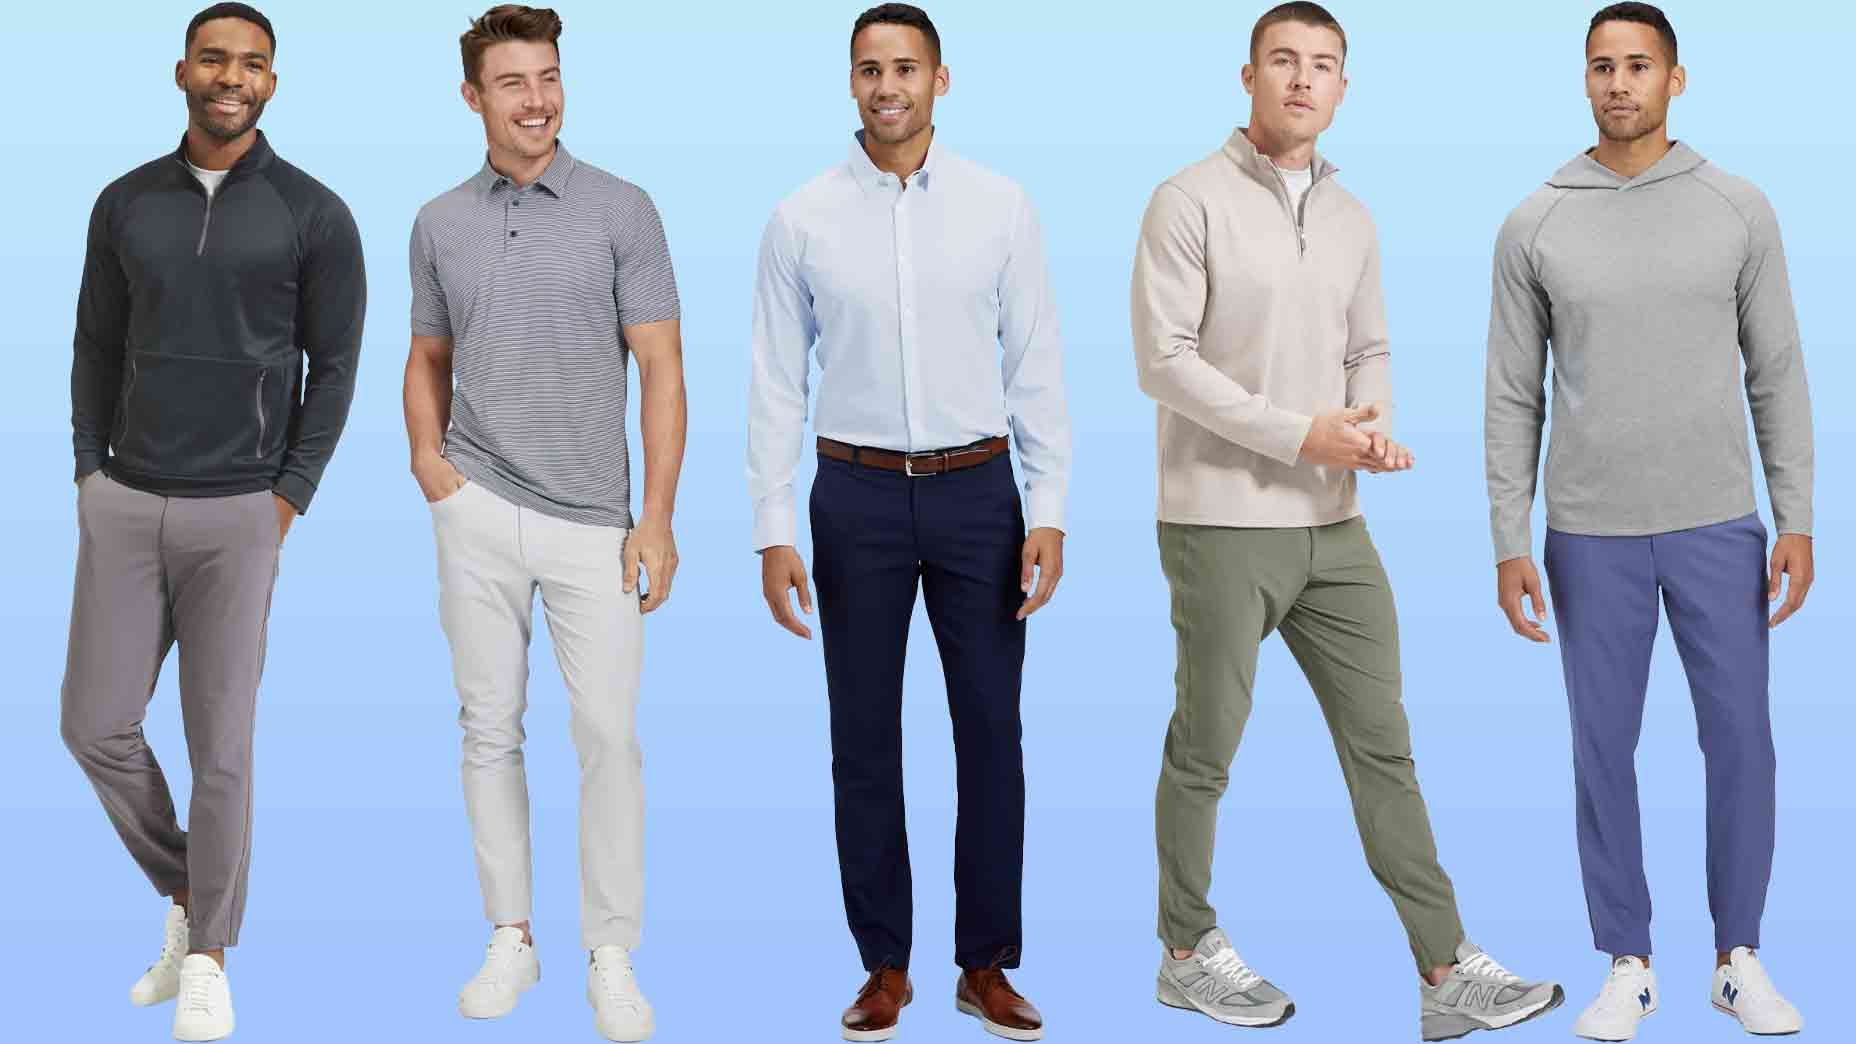 Mizzen+Main apparel: Work and play in these polished pieces